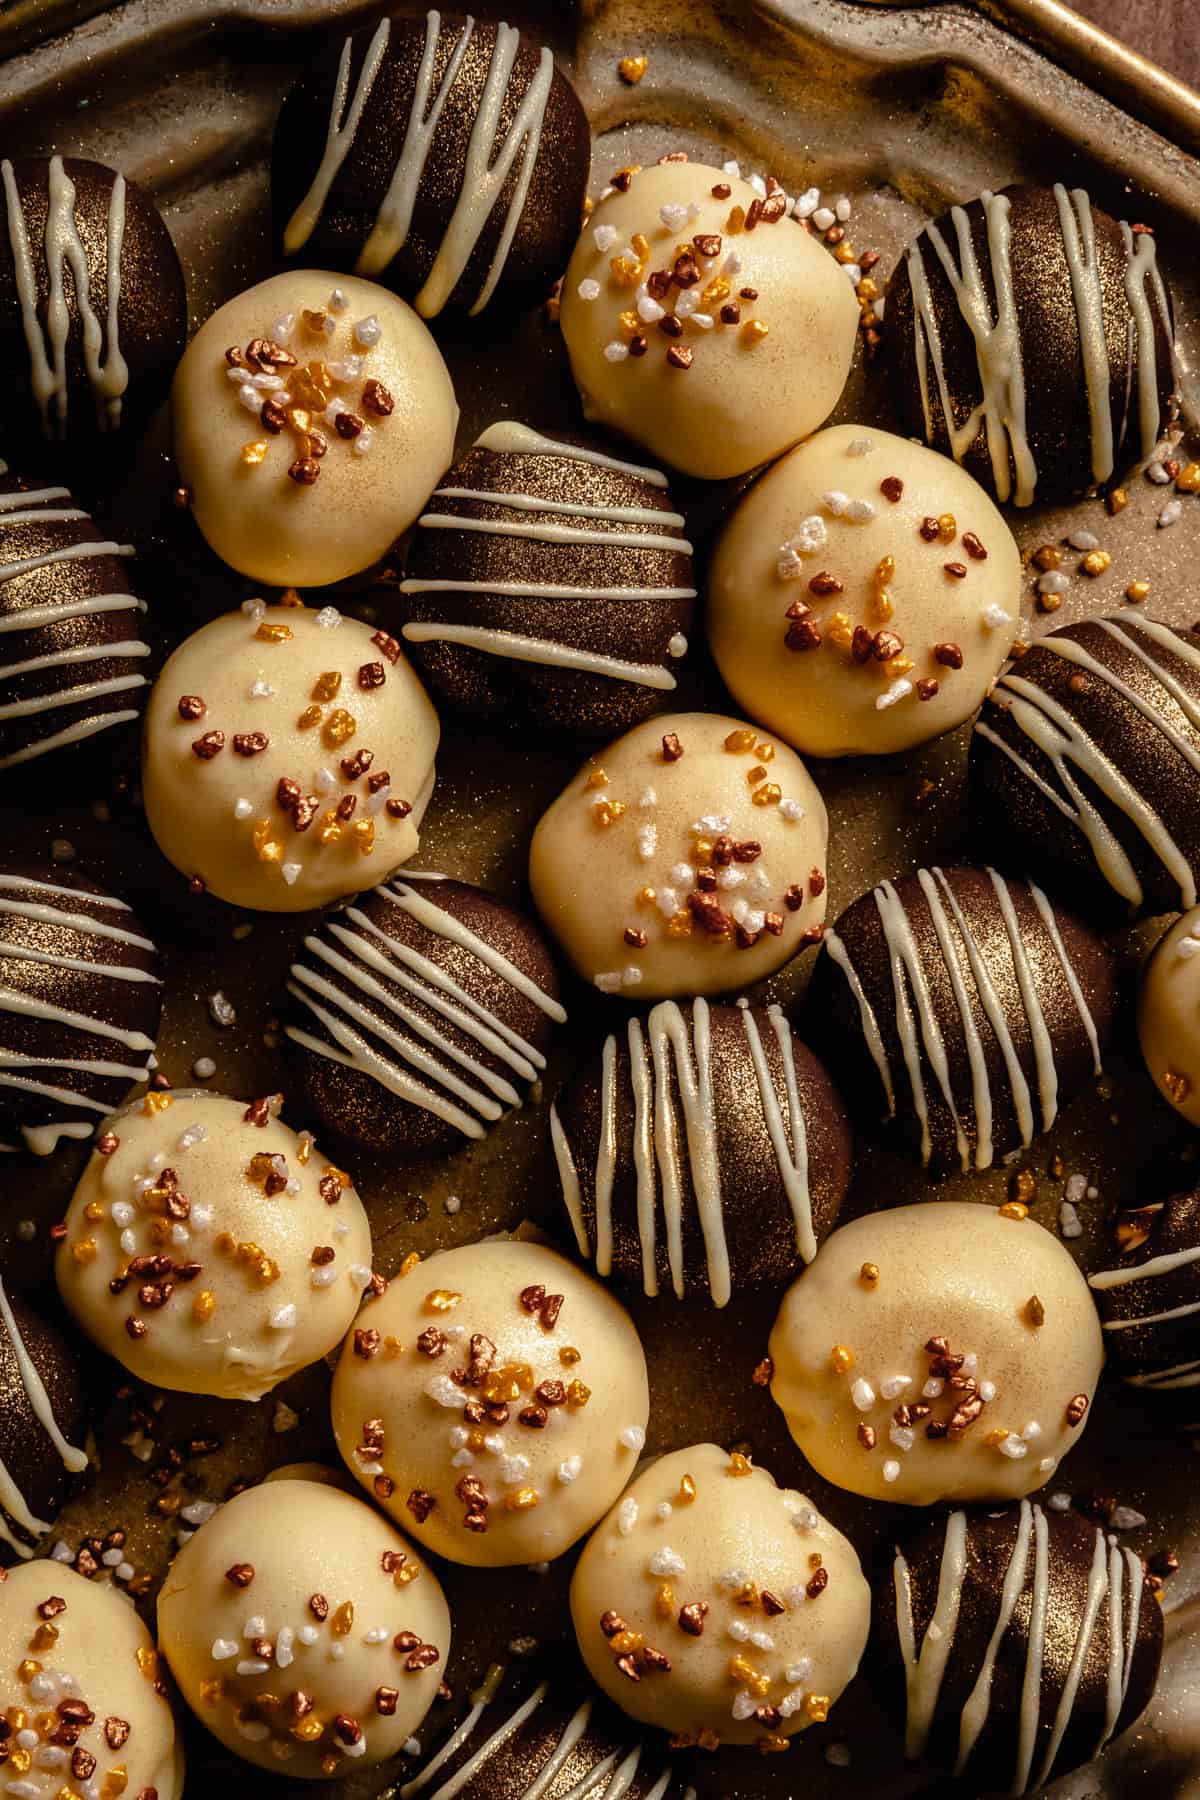 An array of white chocolate truffles on a gold platter decorated with sprinkles and gold glitter.